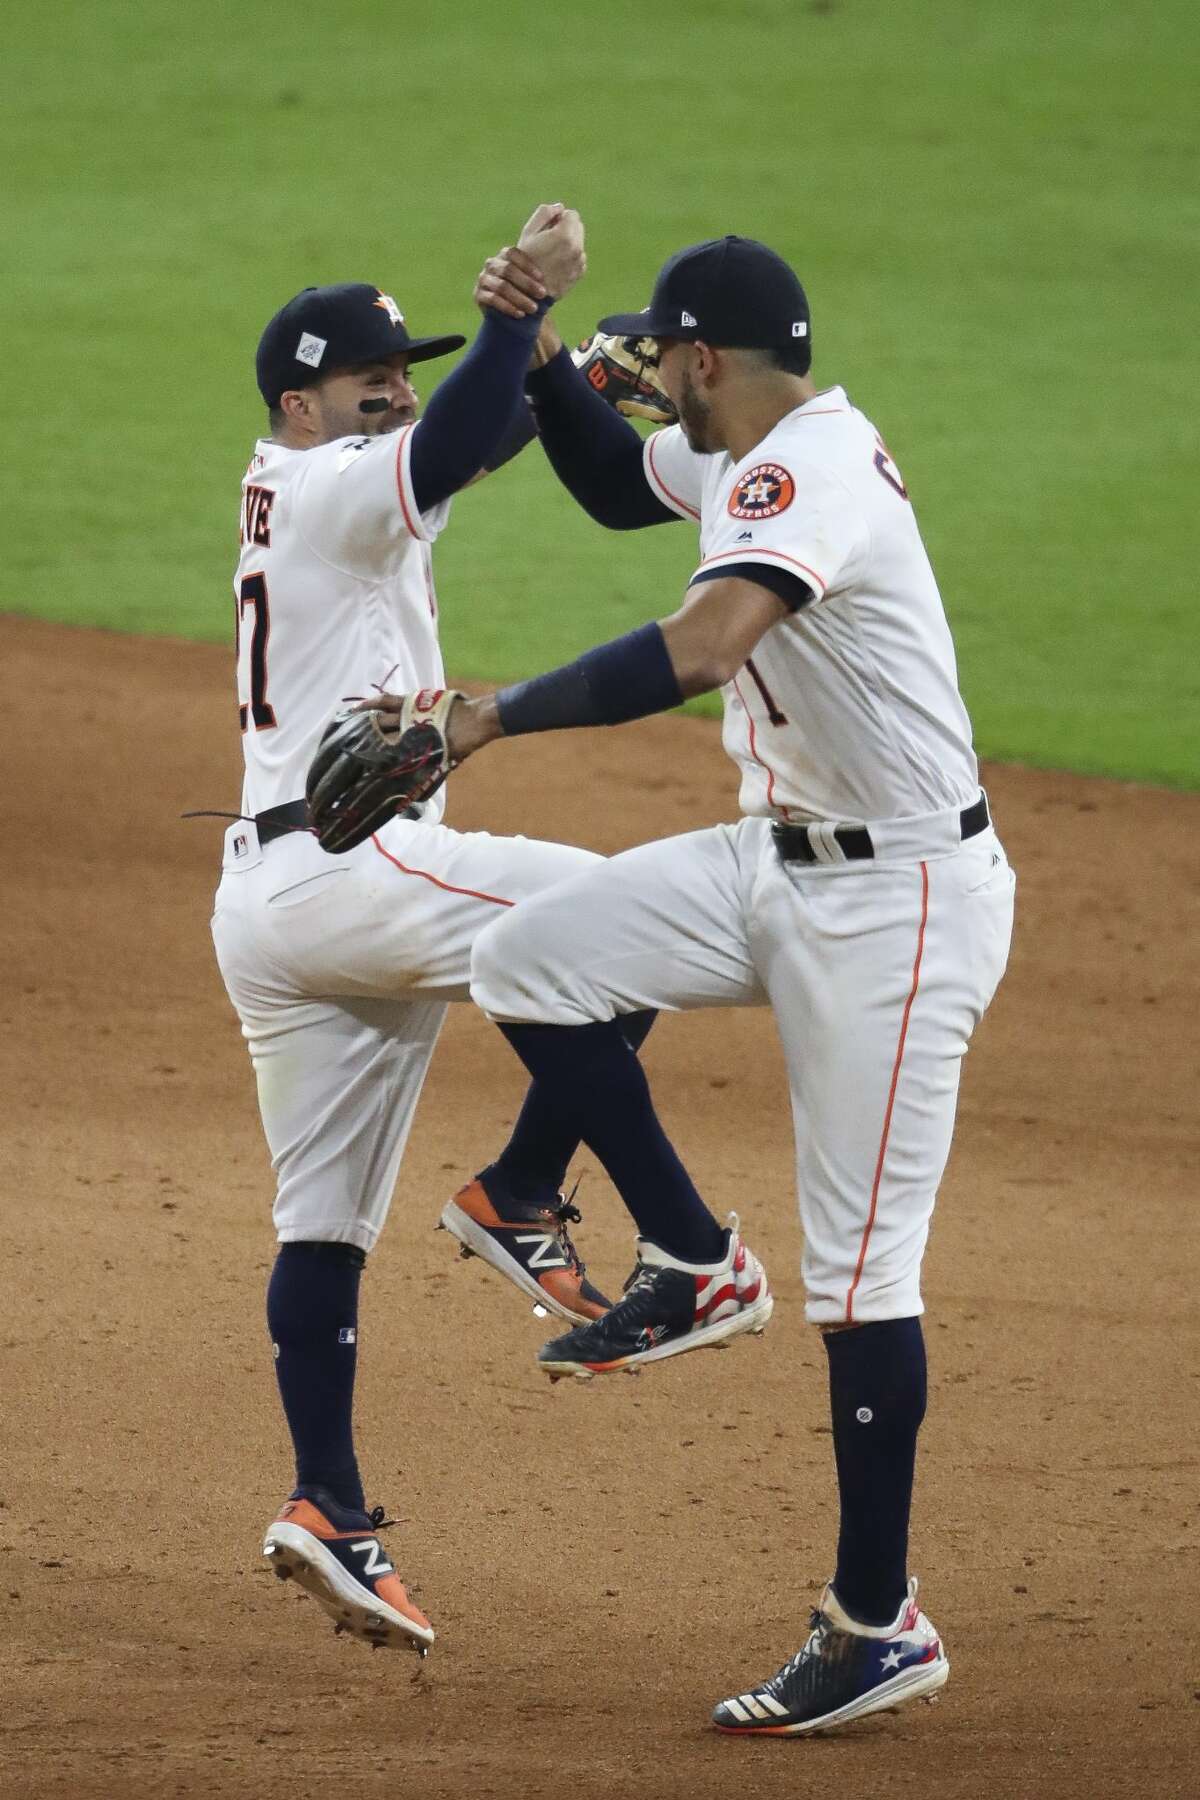 Houston Astros second baseman Jose Altuve (27) and shortstop Carlos Correa (1) celebrate as they beat the Los Angeles Dodgers 5-3 in Game 3 of the World Series at Minute Maid Park Friday, Oct. 27, 2017 in Houston.